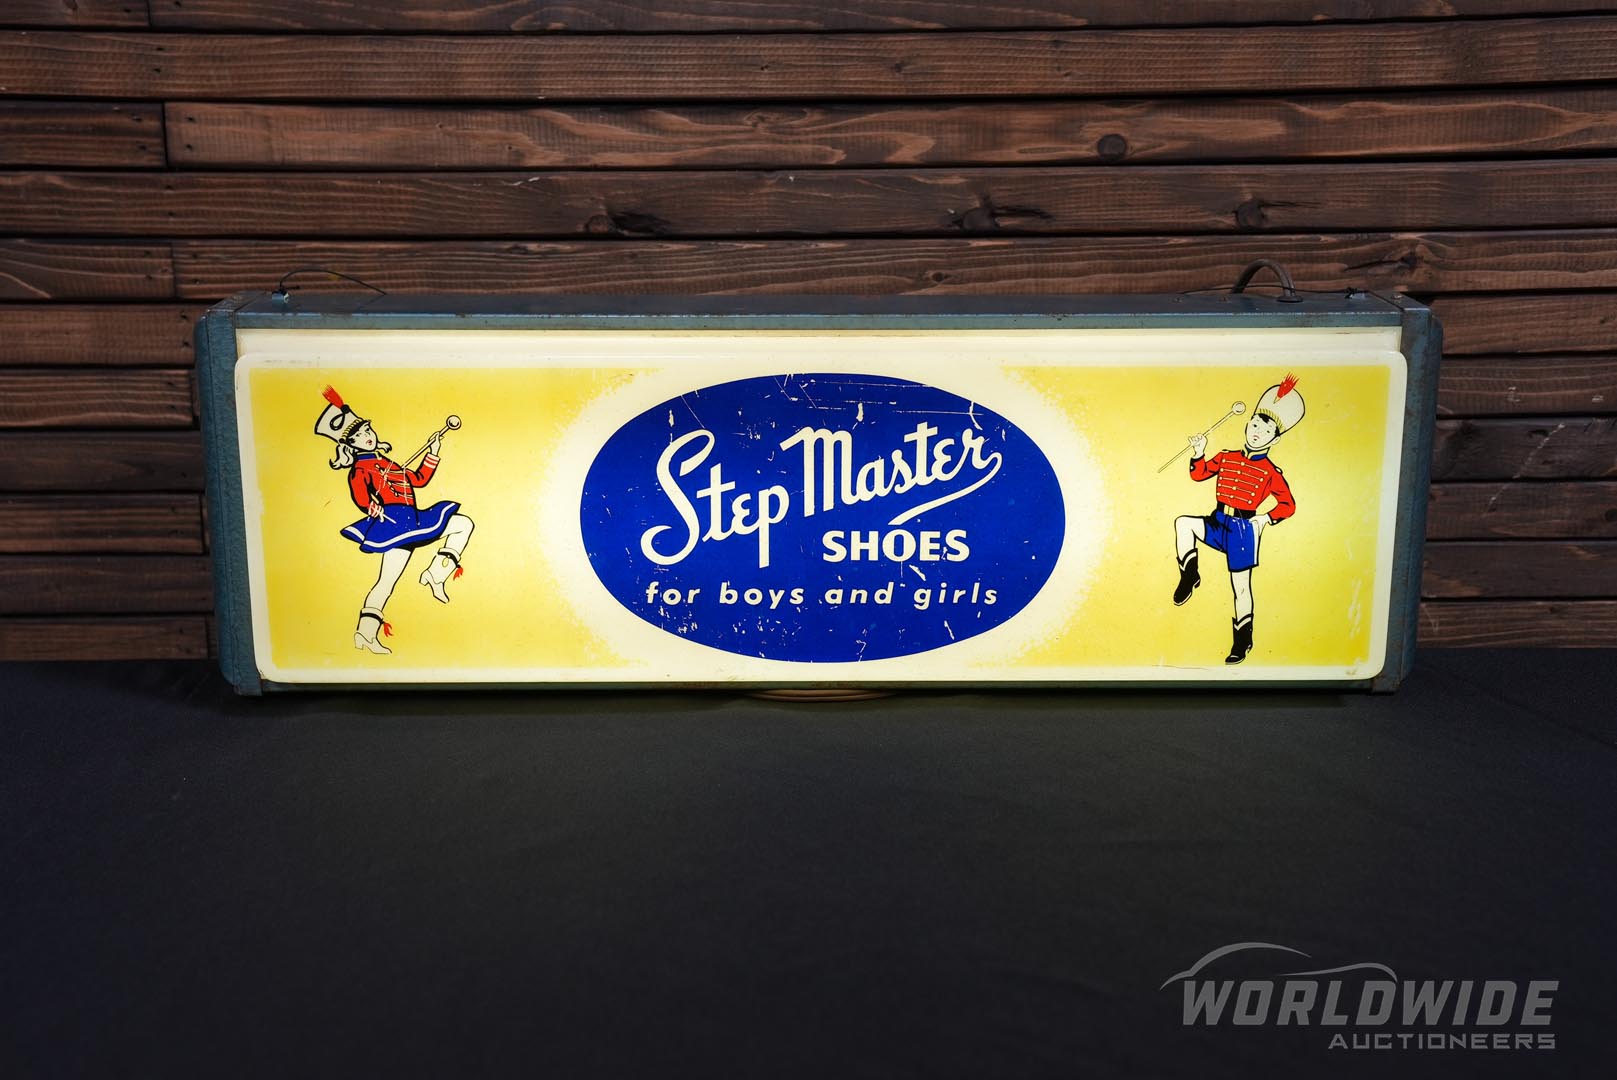  Step Master Shoes Lighted Sign  